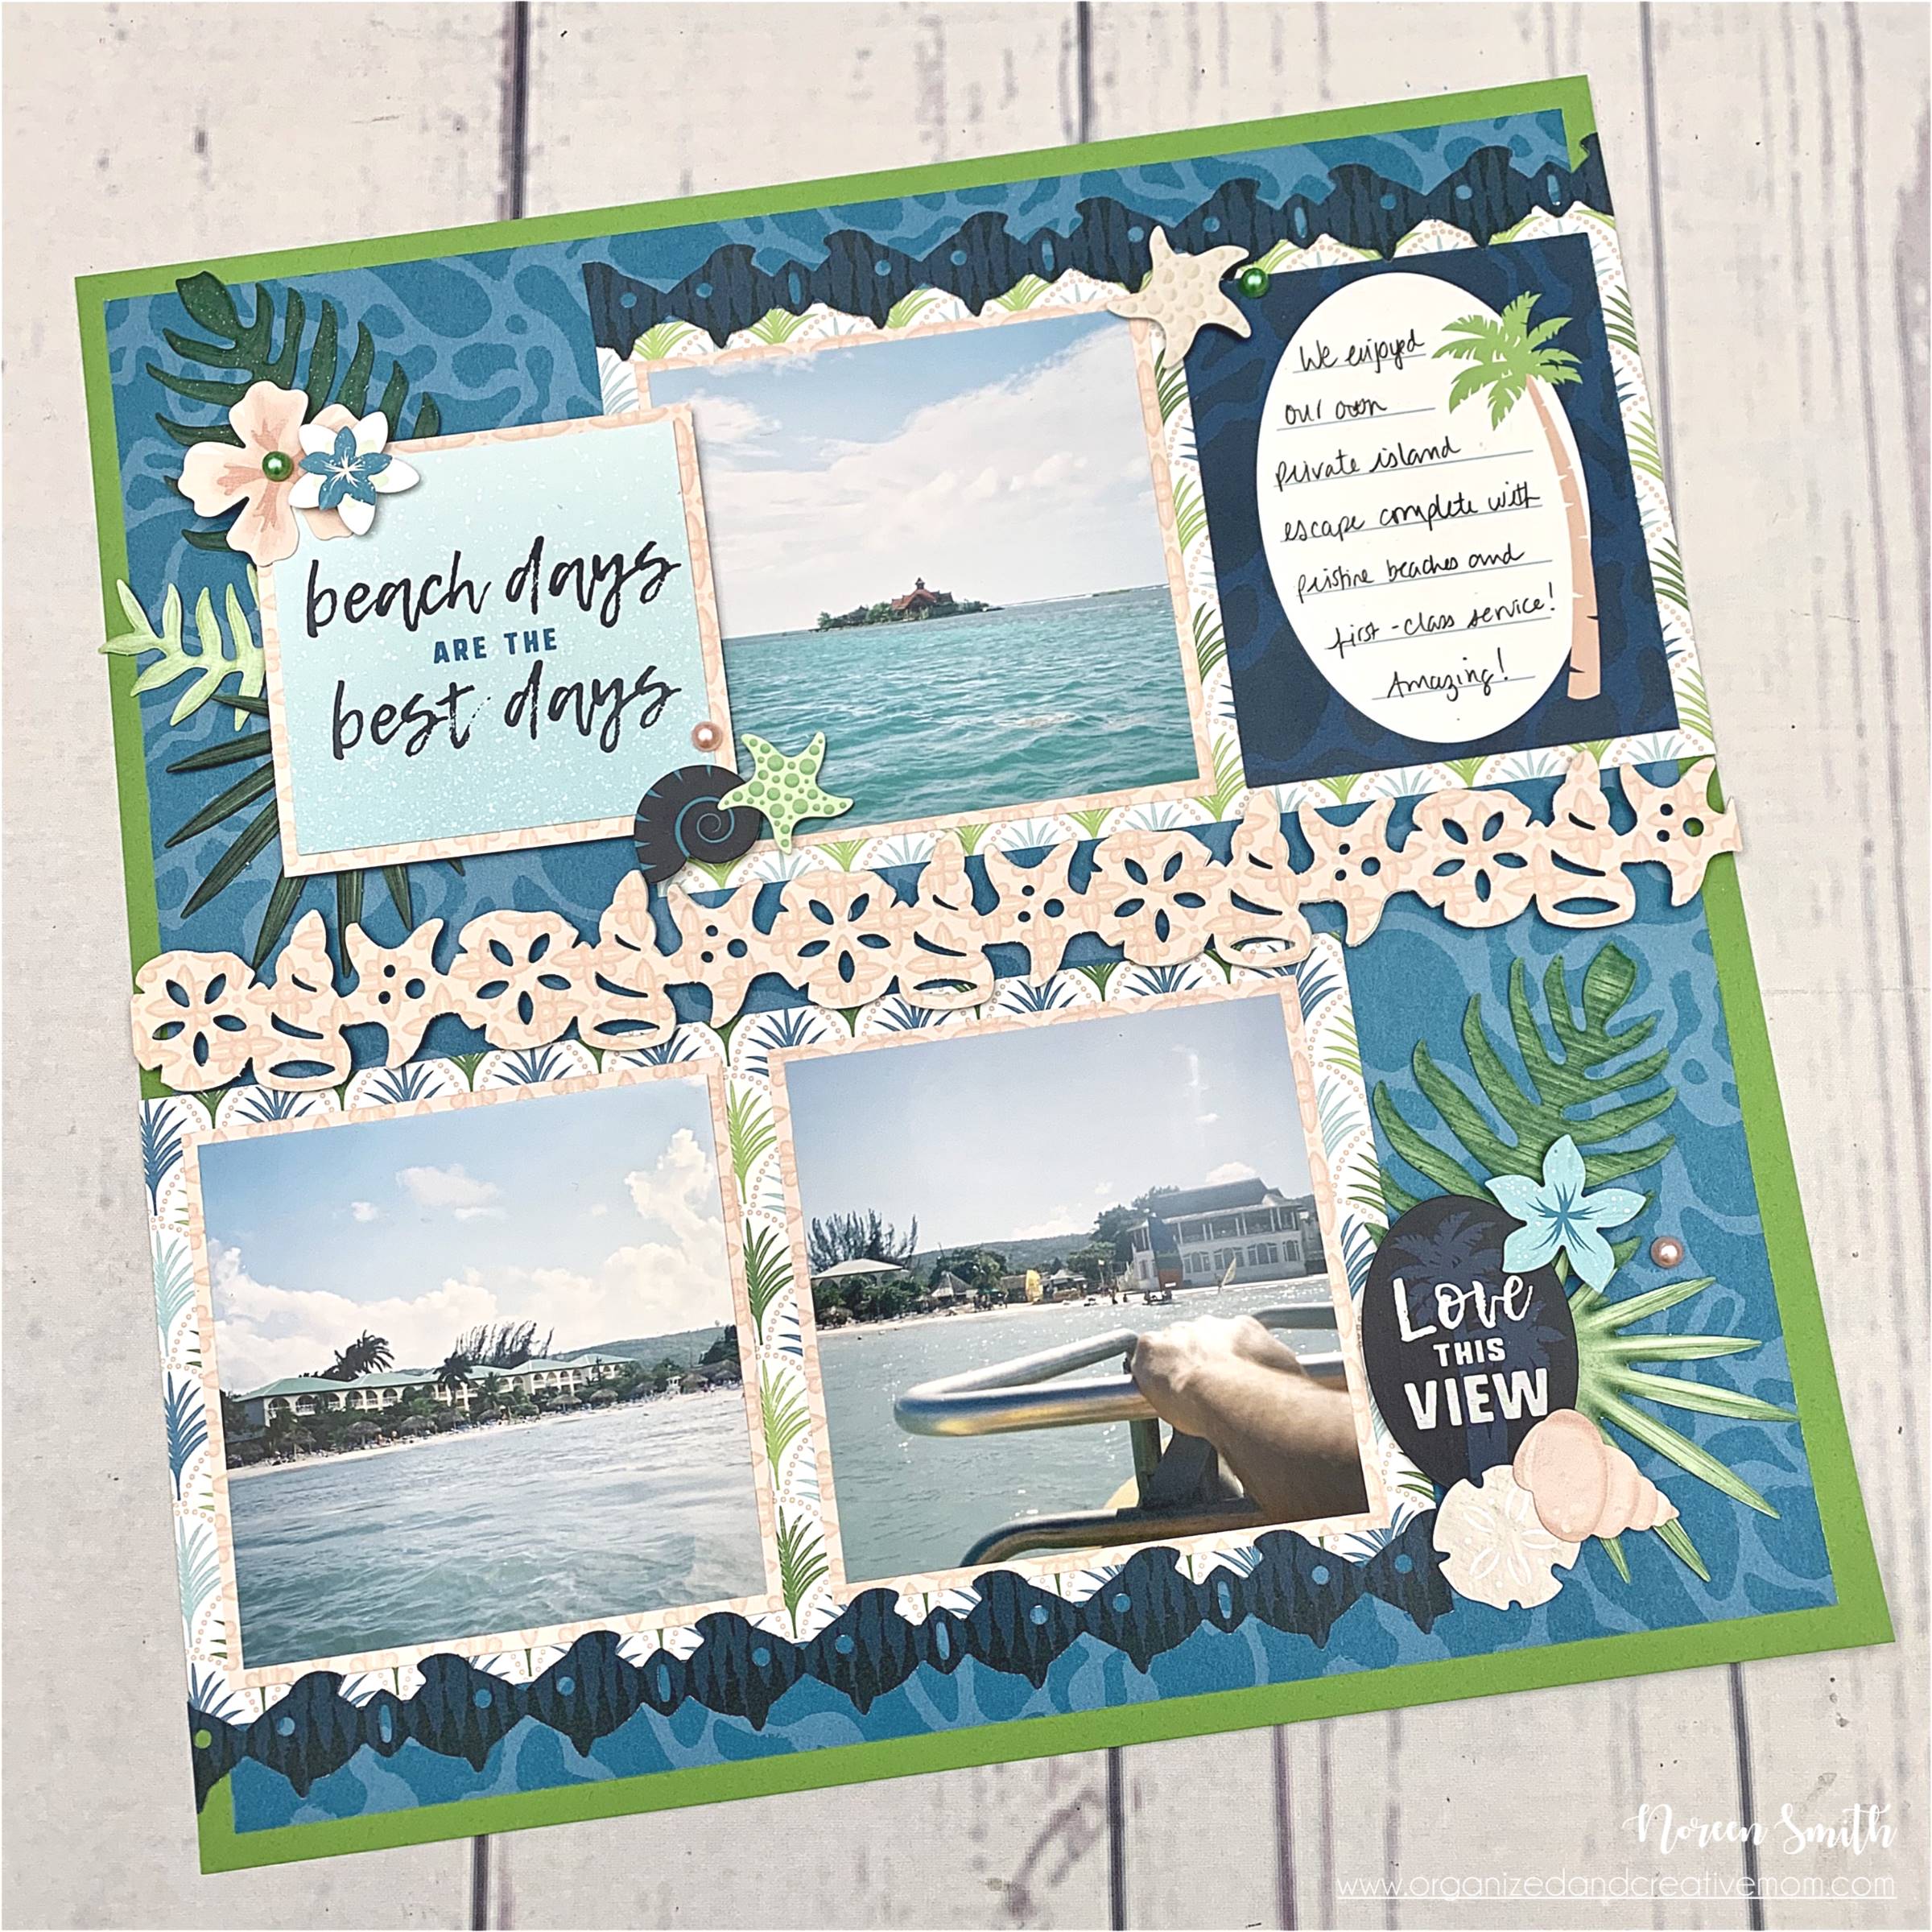 Vitamin Sea Collection by Creative Memories and Noreen Smith